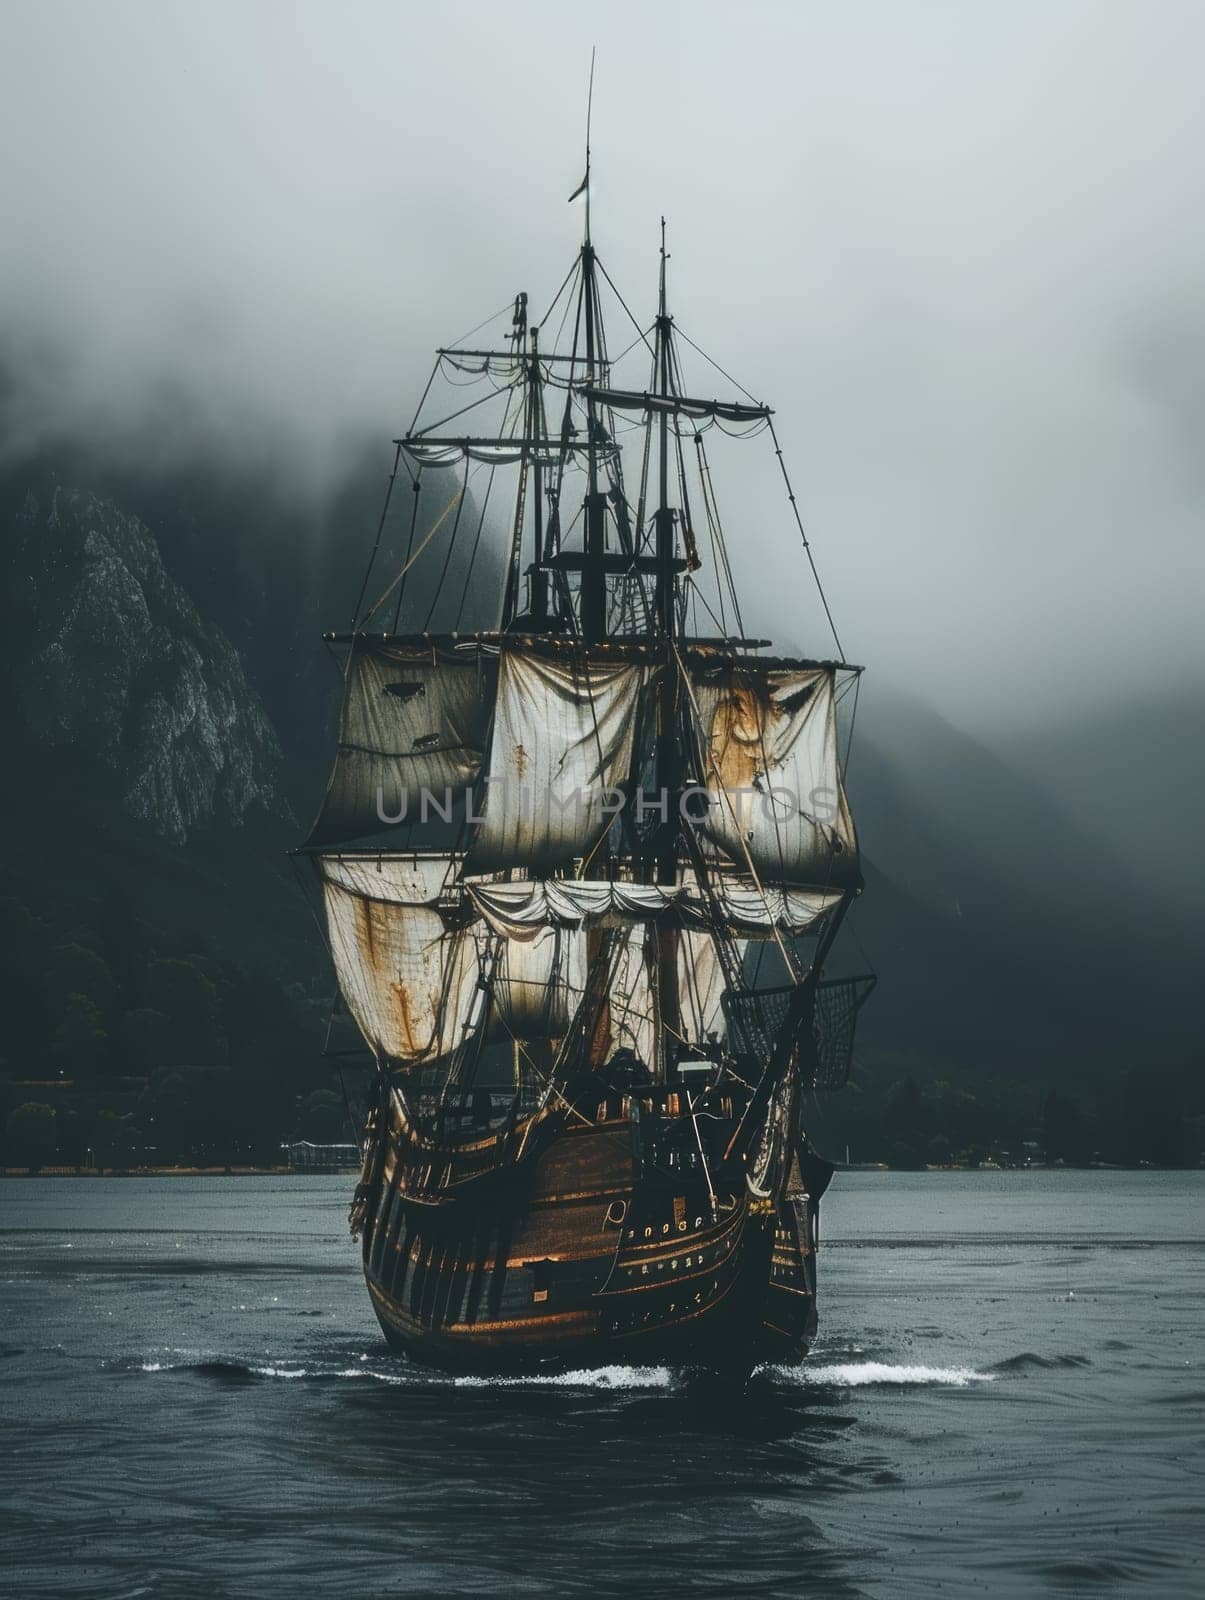 A mysterious pirate ship navigates close to a foggy cliff under the cover of night, creating an atmosphere of intrigue and adventure